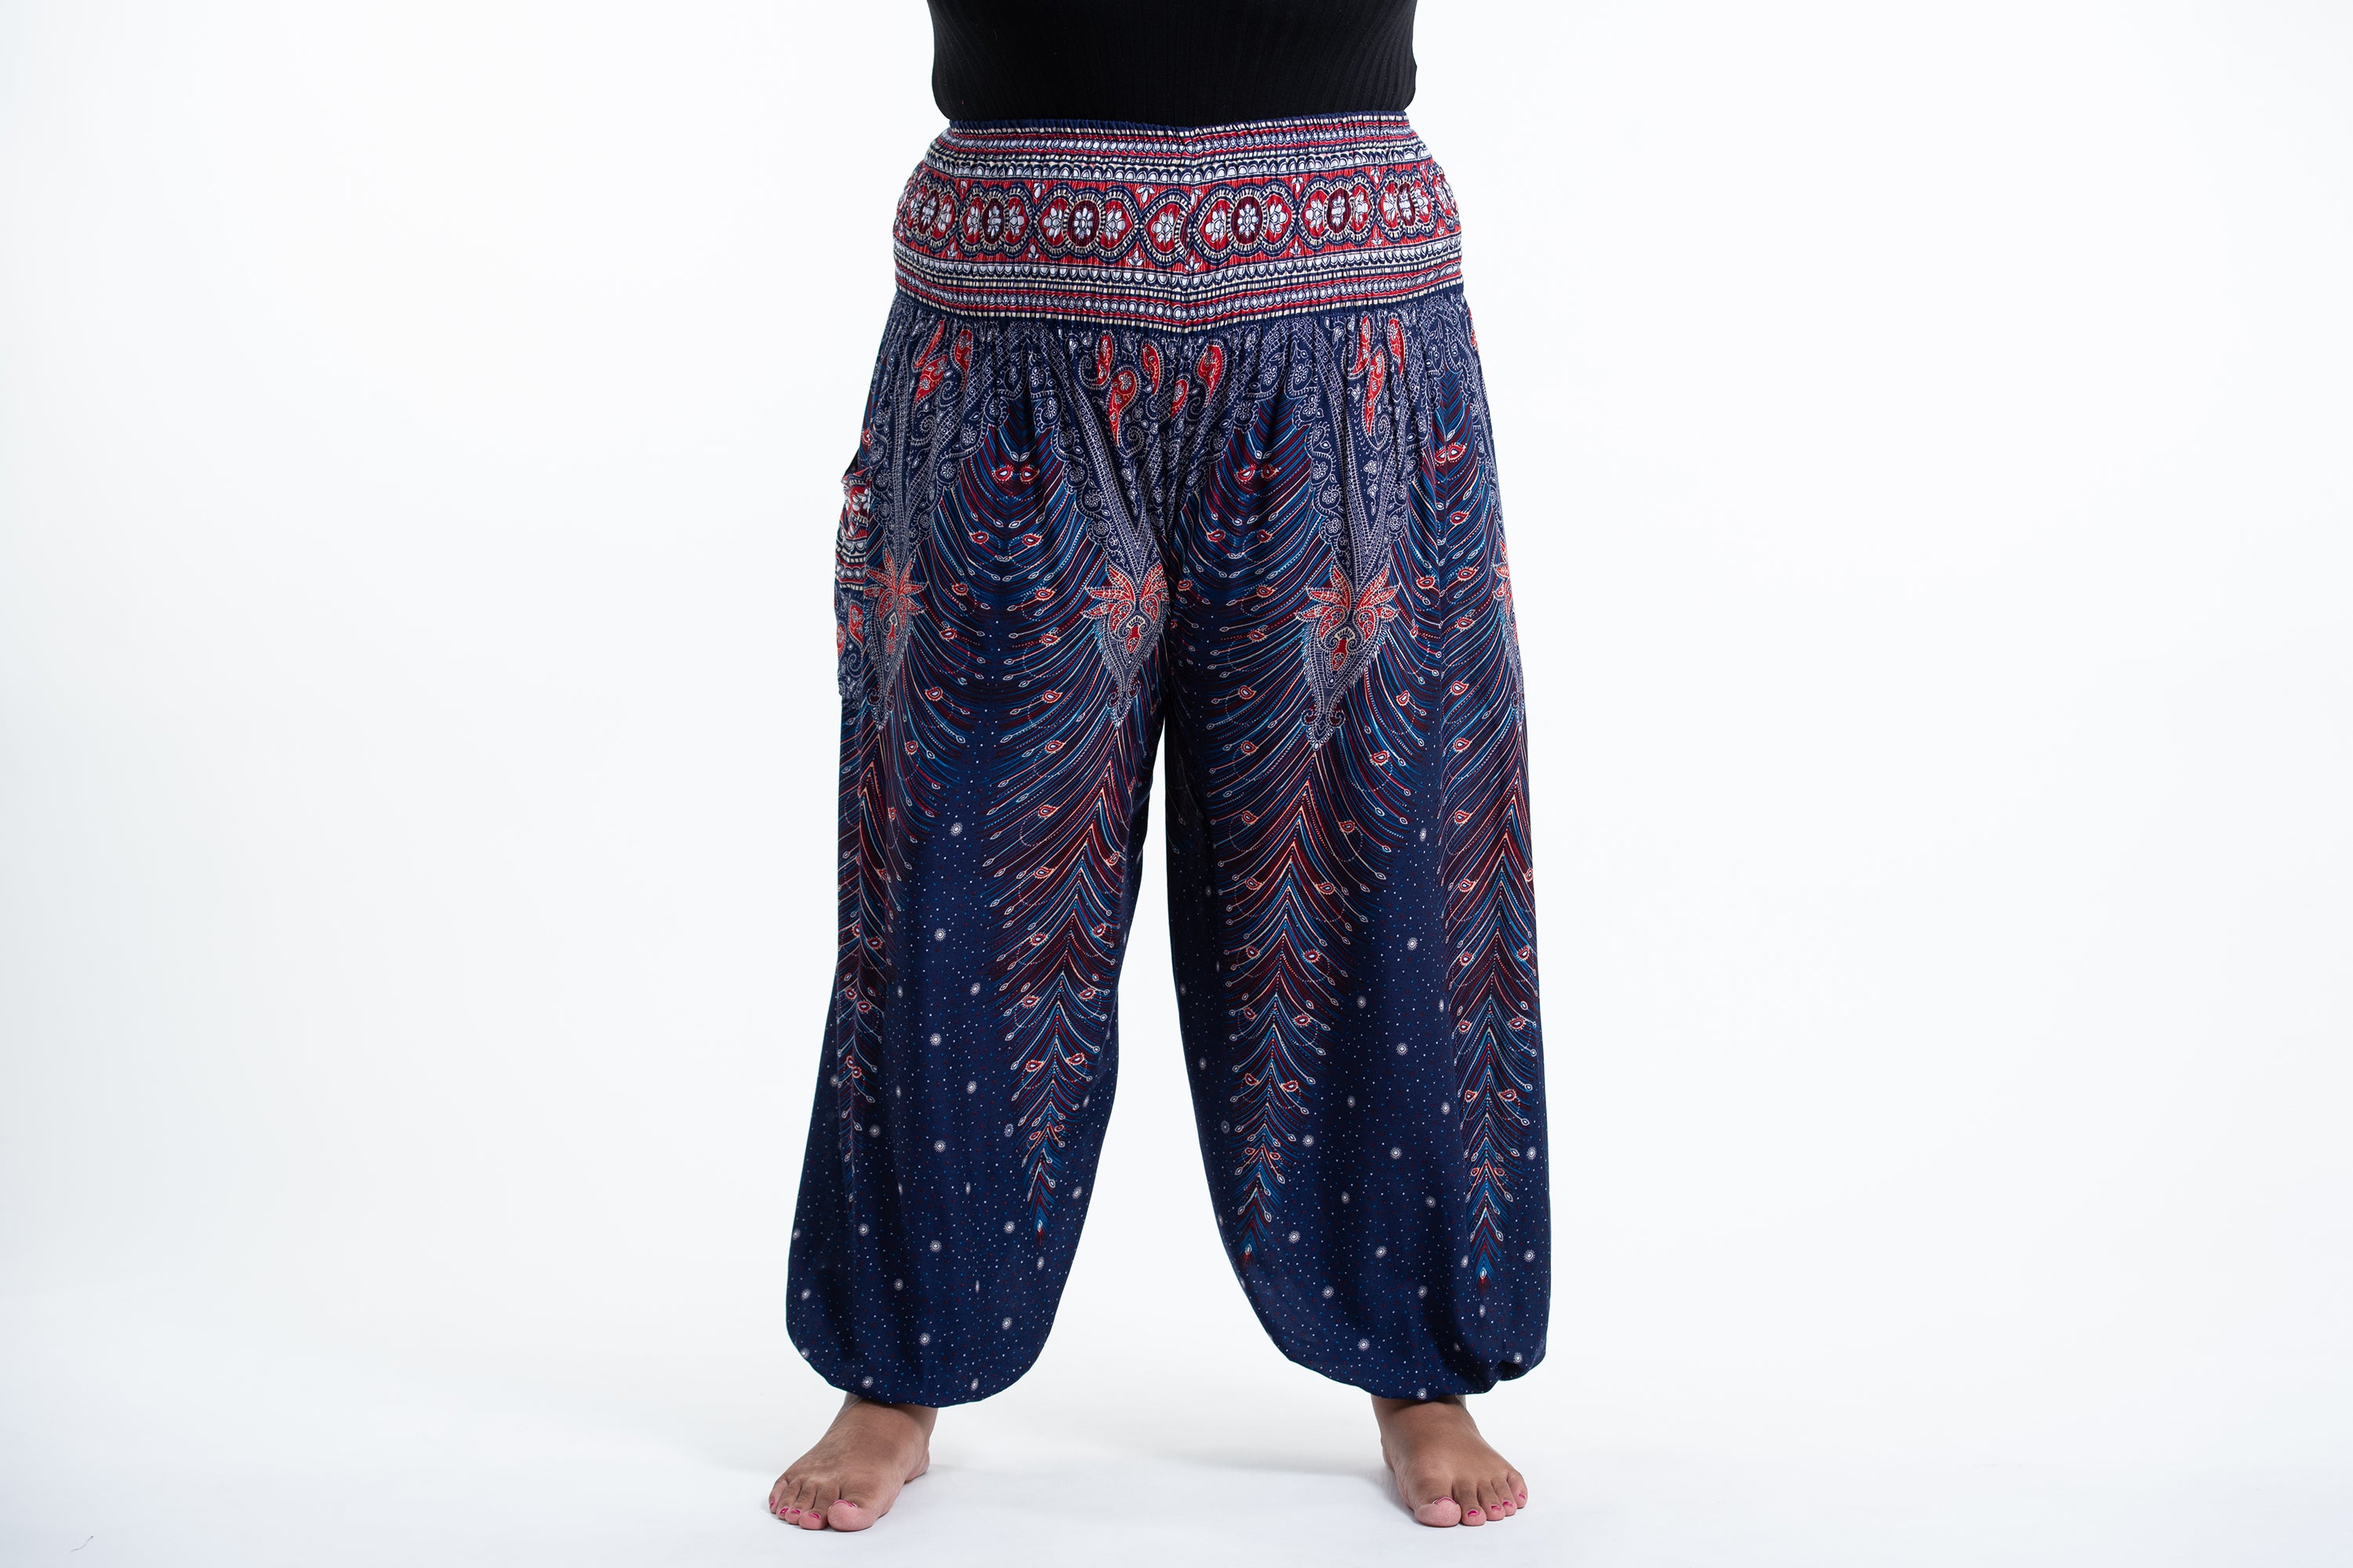 Plus Size Peacock Feathers Women's Harem Pants in Blue